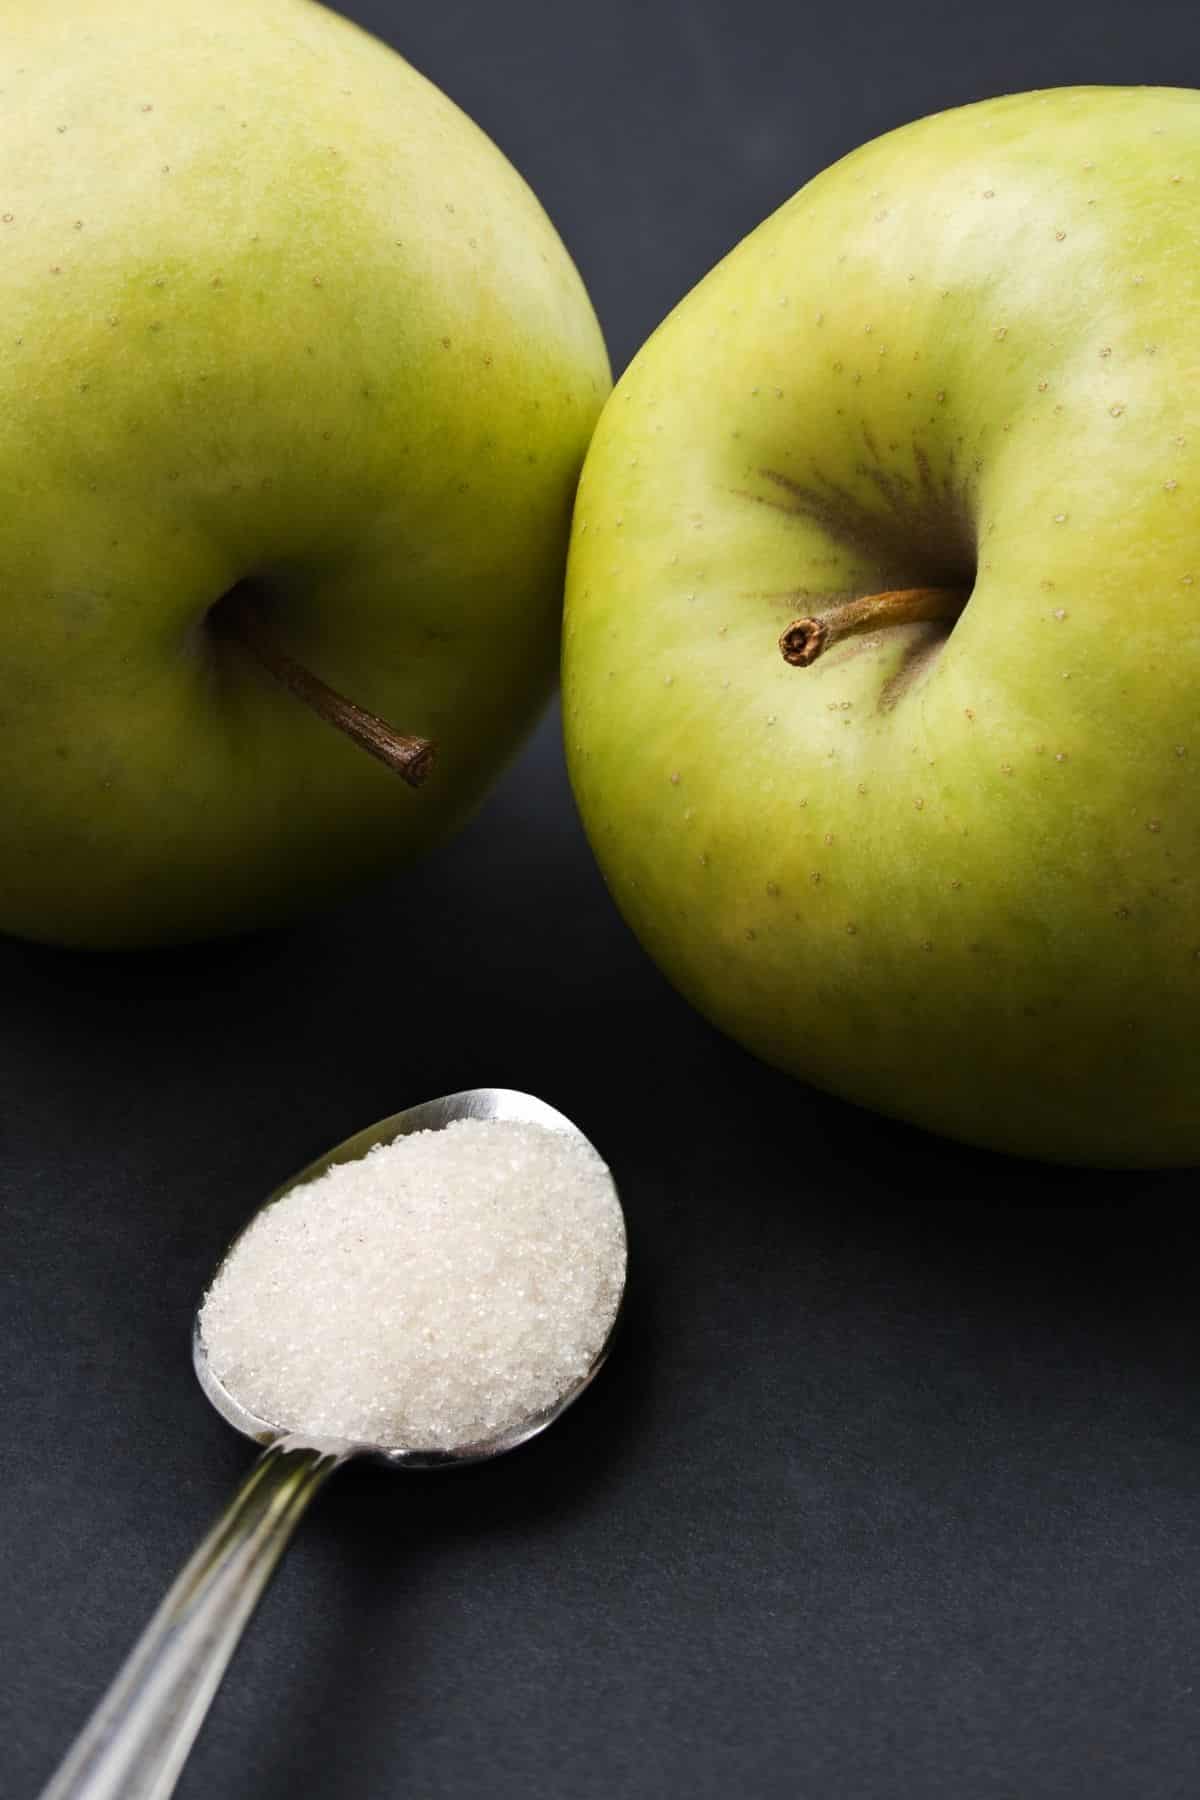 A spoon of sugar in front of 2 apples.